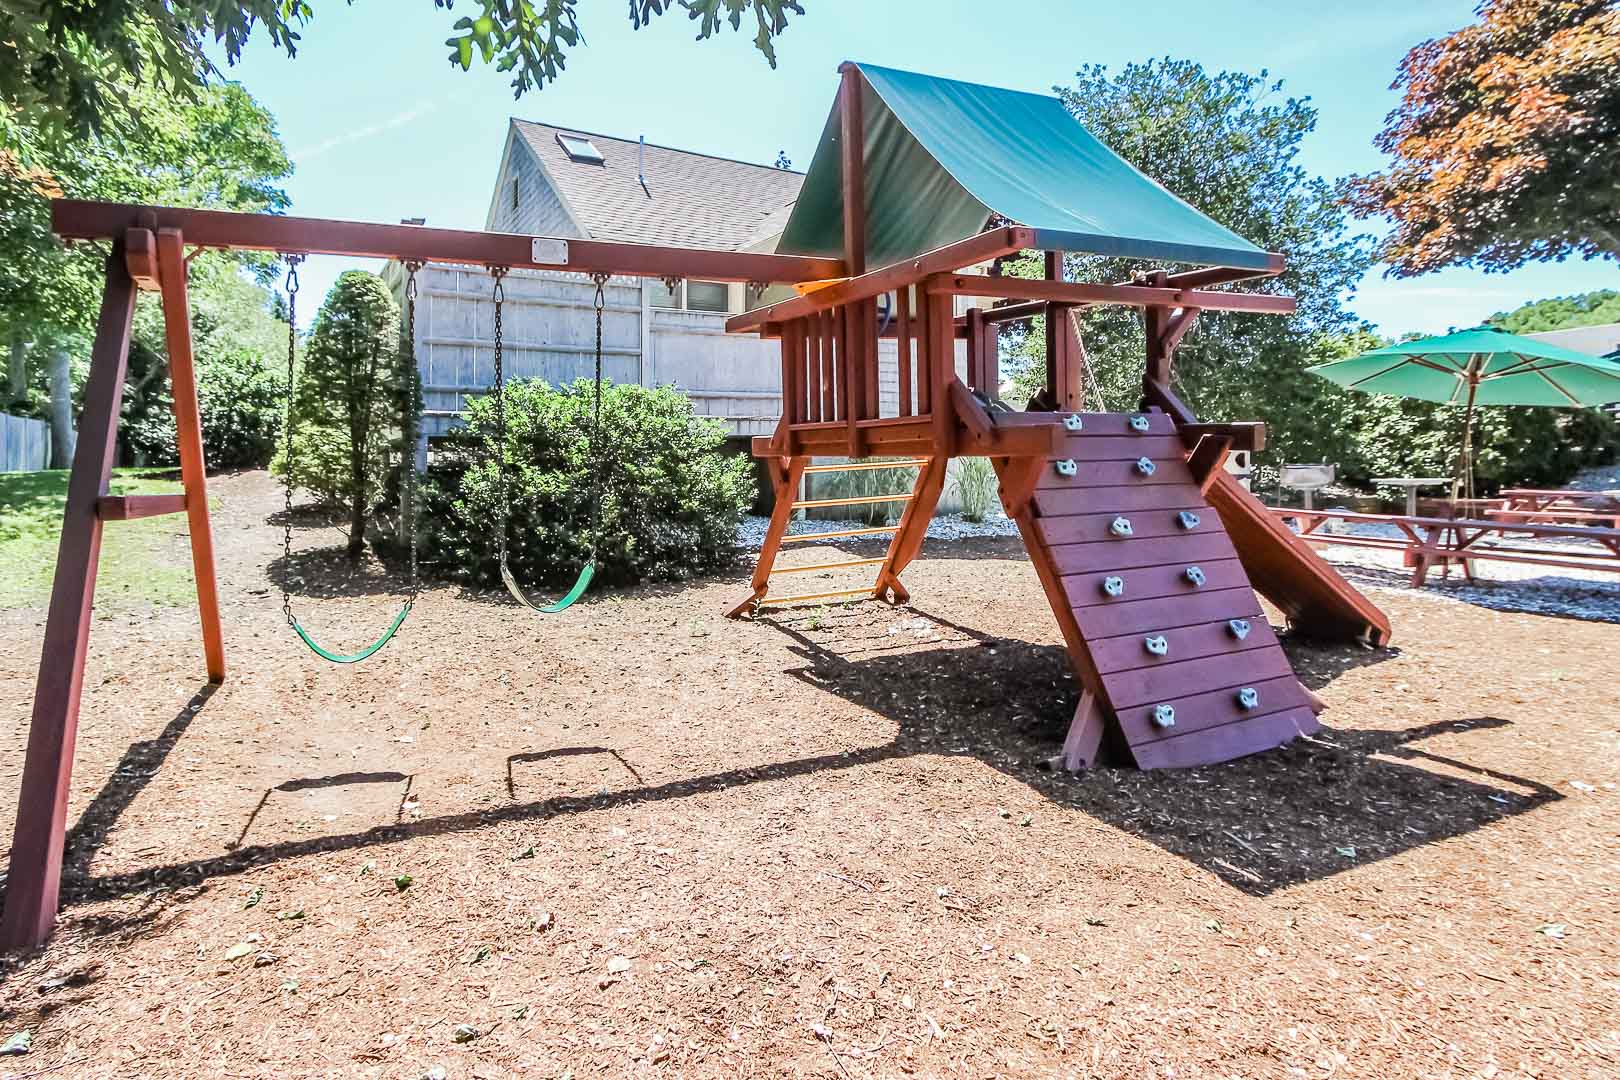 a charming playground for kids at VRI's Holly Tree Resort in Massachusetts.